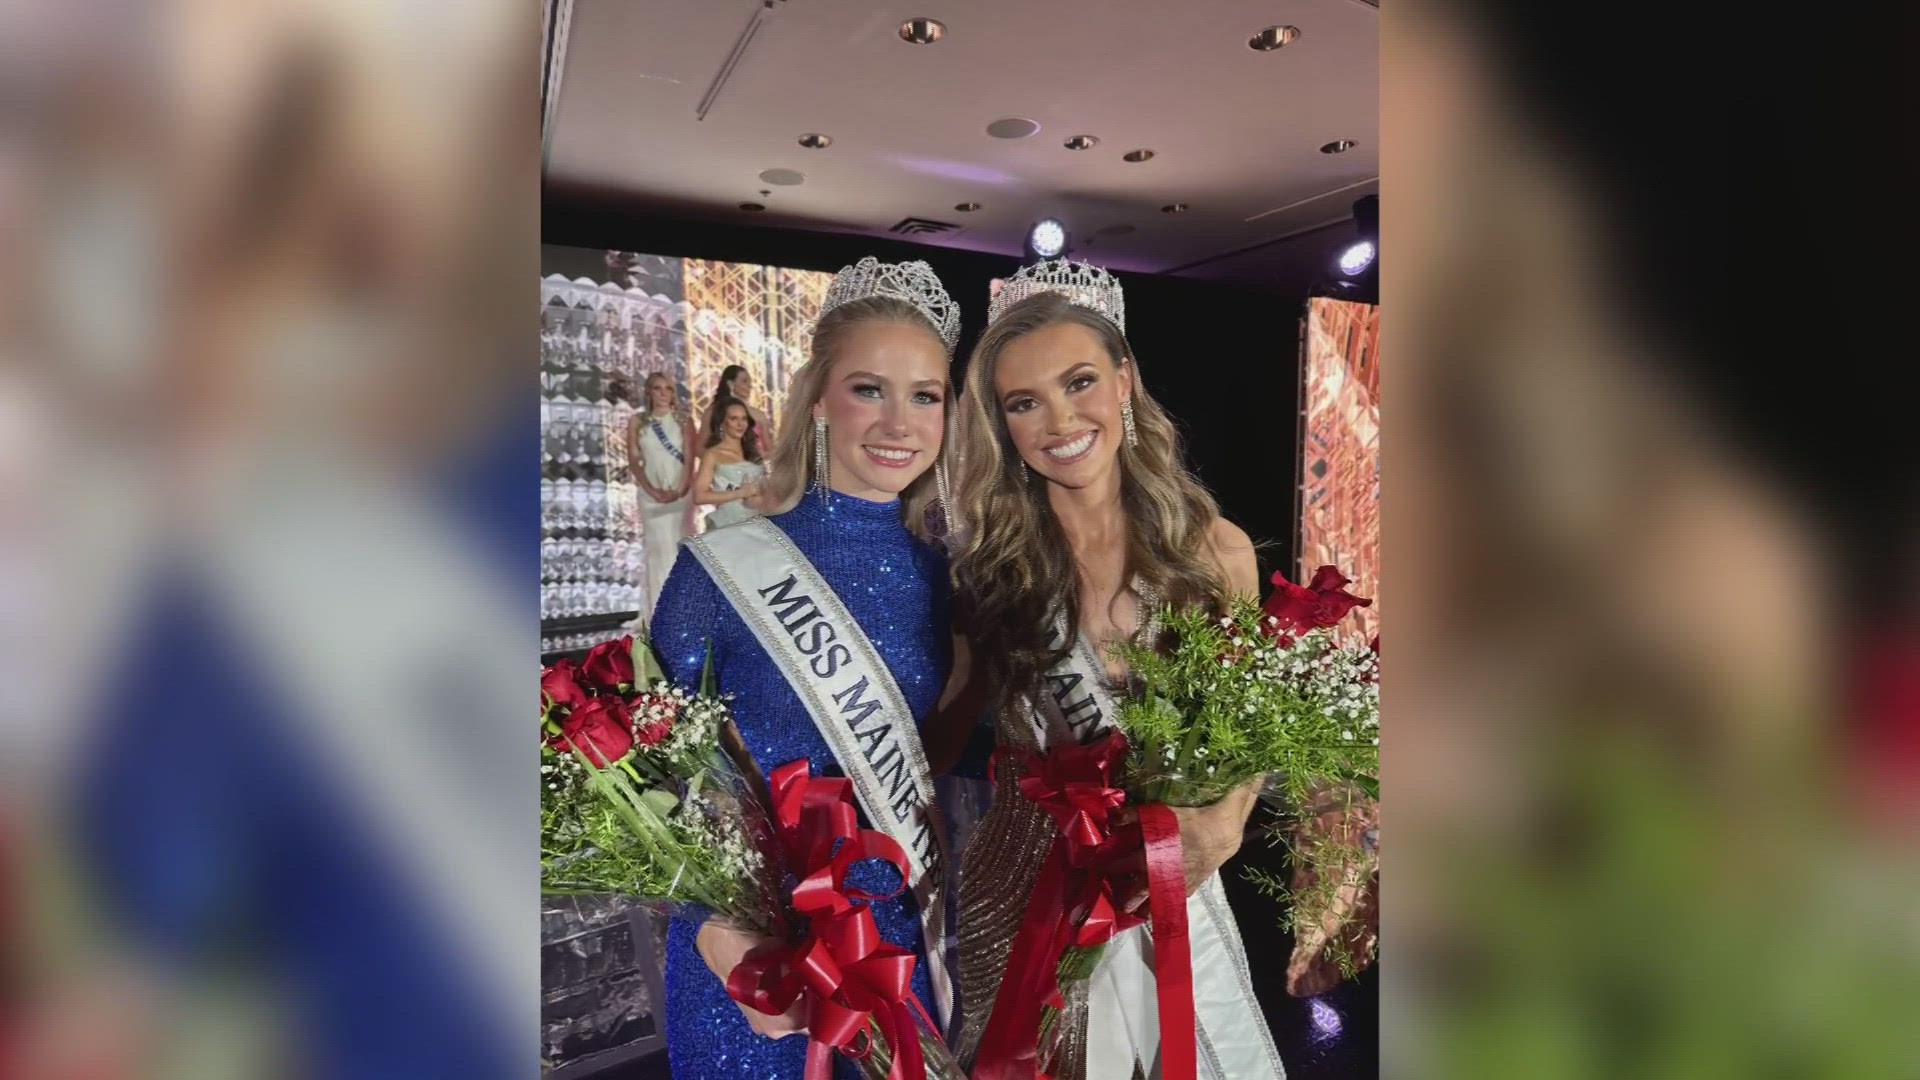 She and Abby Hafer, who was crowned Miss Maine Teen USA, will prepare for the national competition in August.